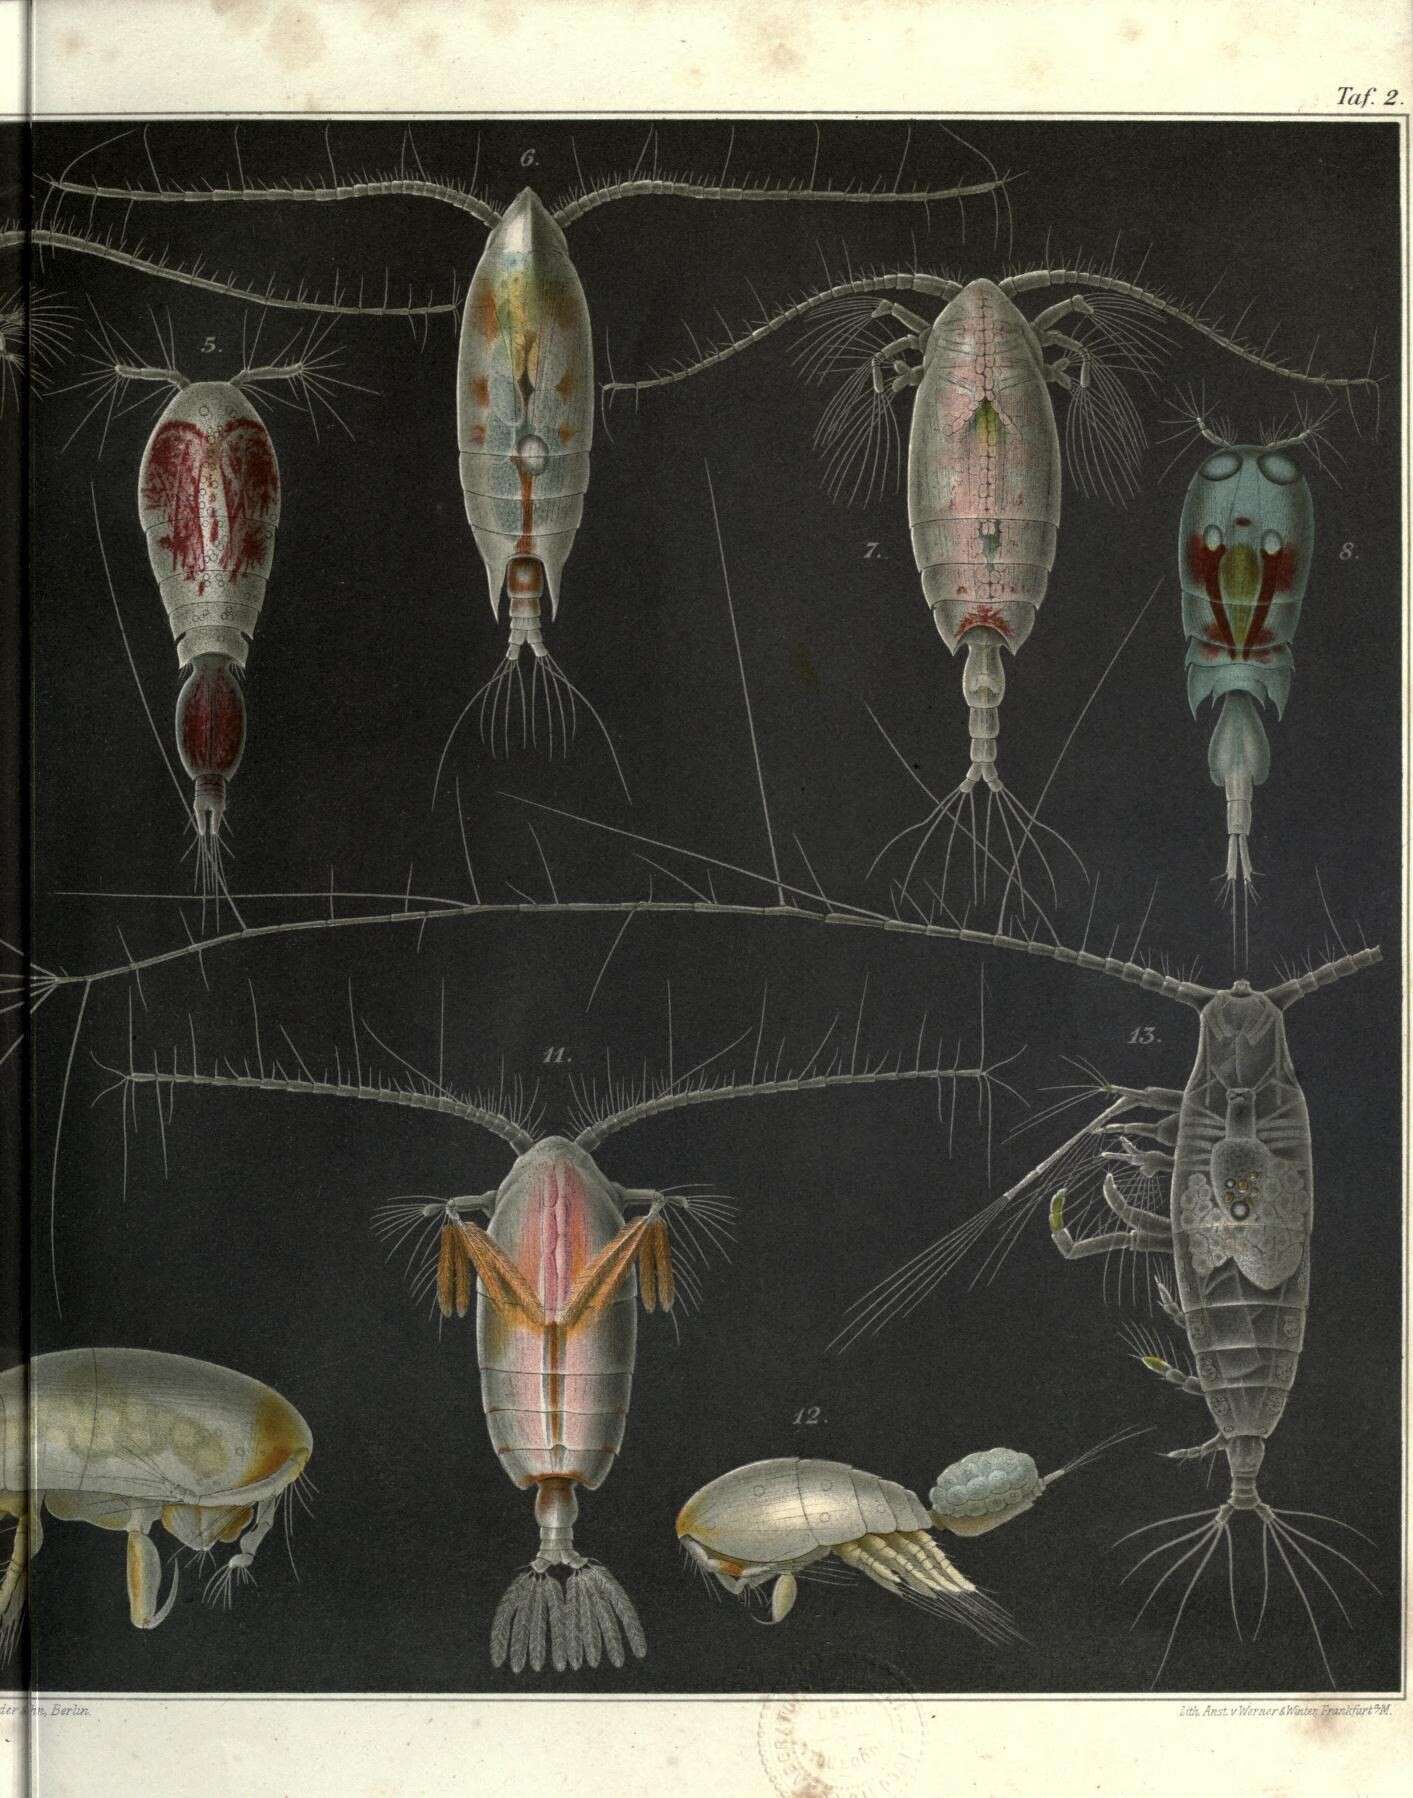 Image of copepods